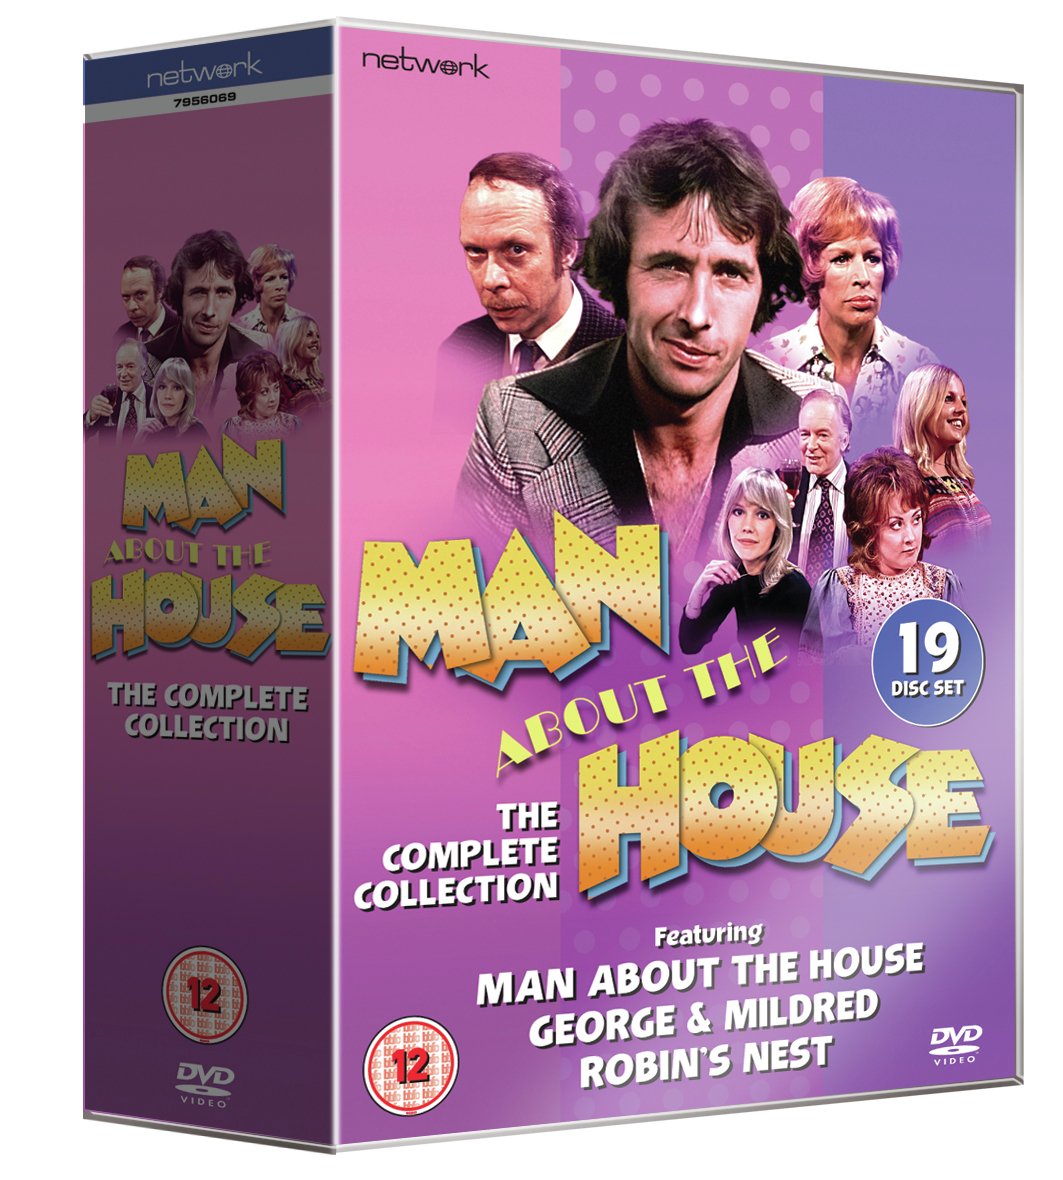 Man About The House: The Complete Collection DVD Box Set Review